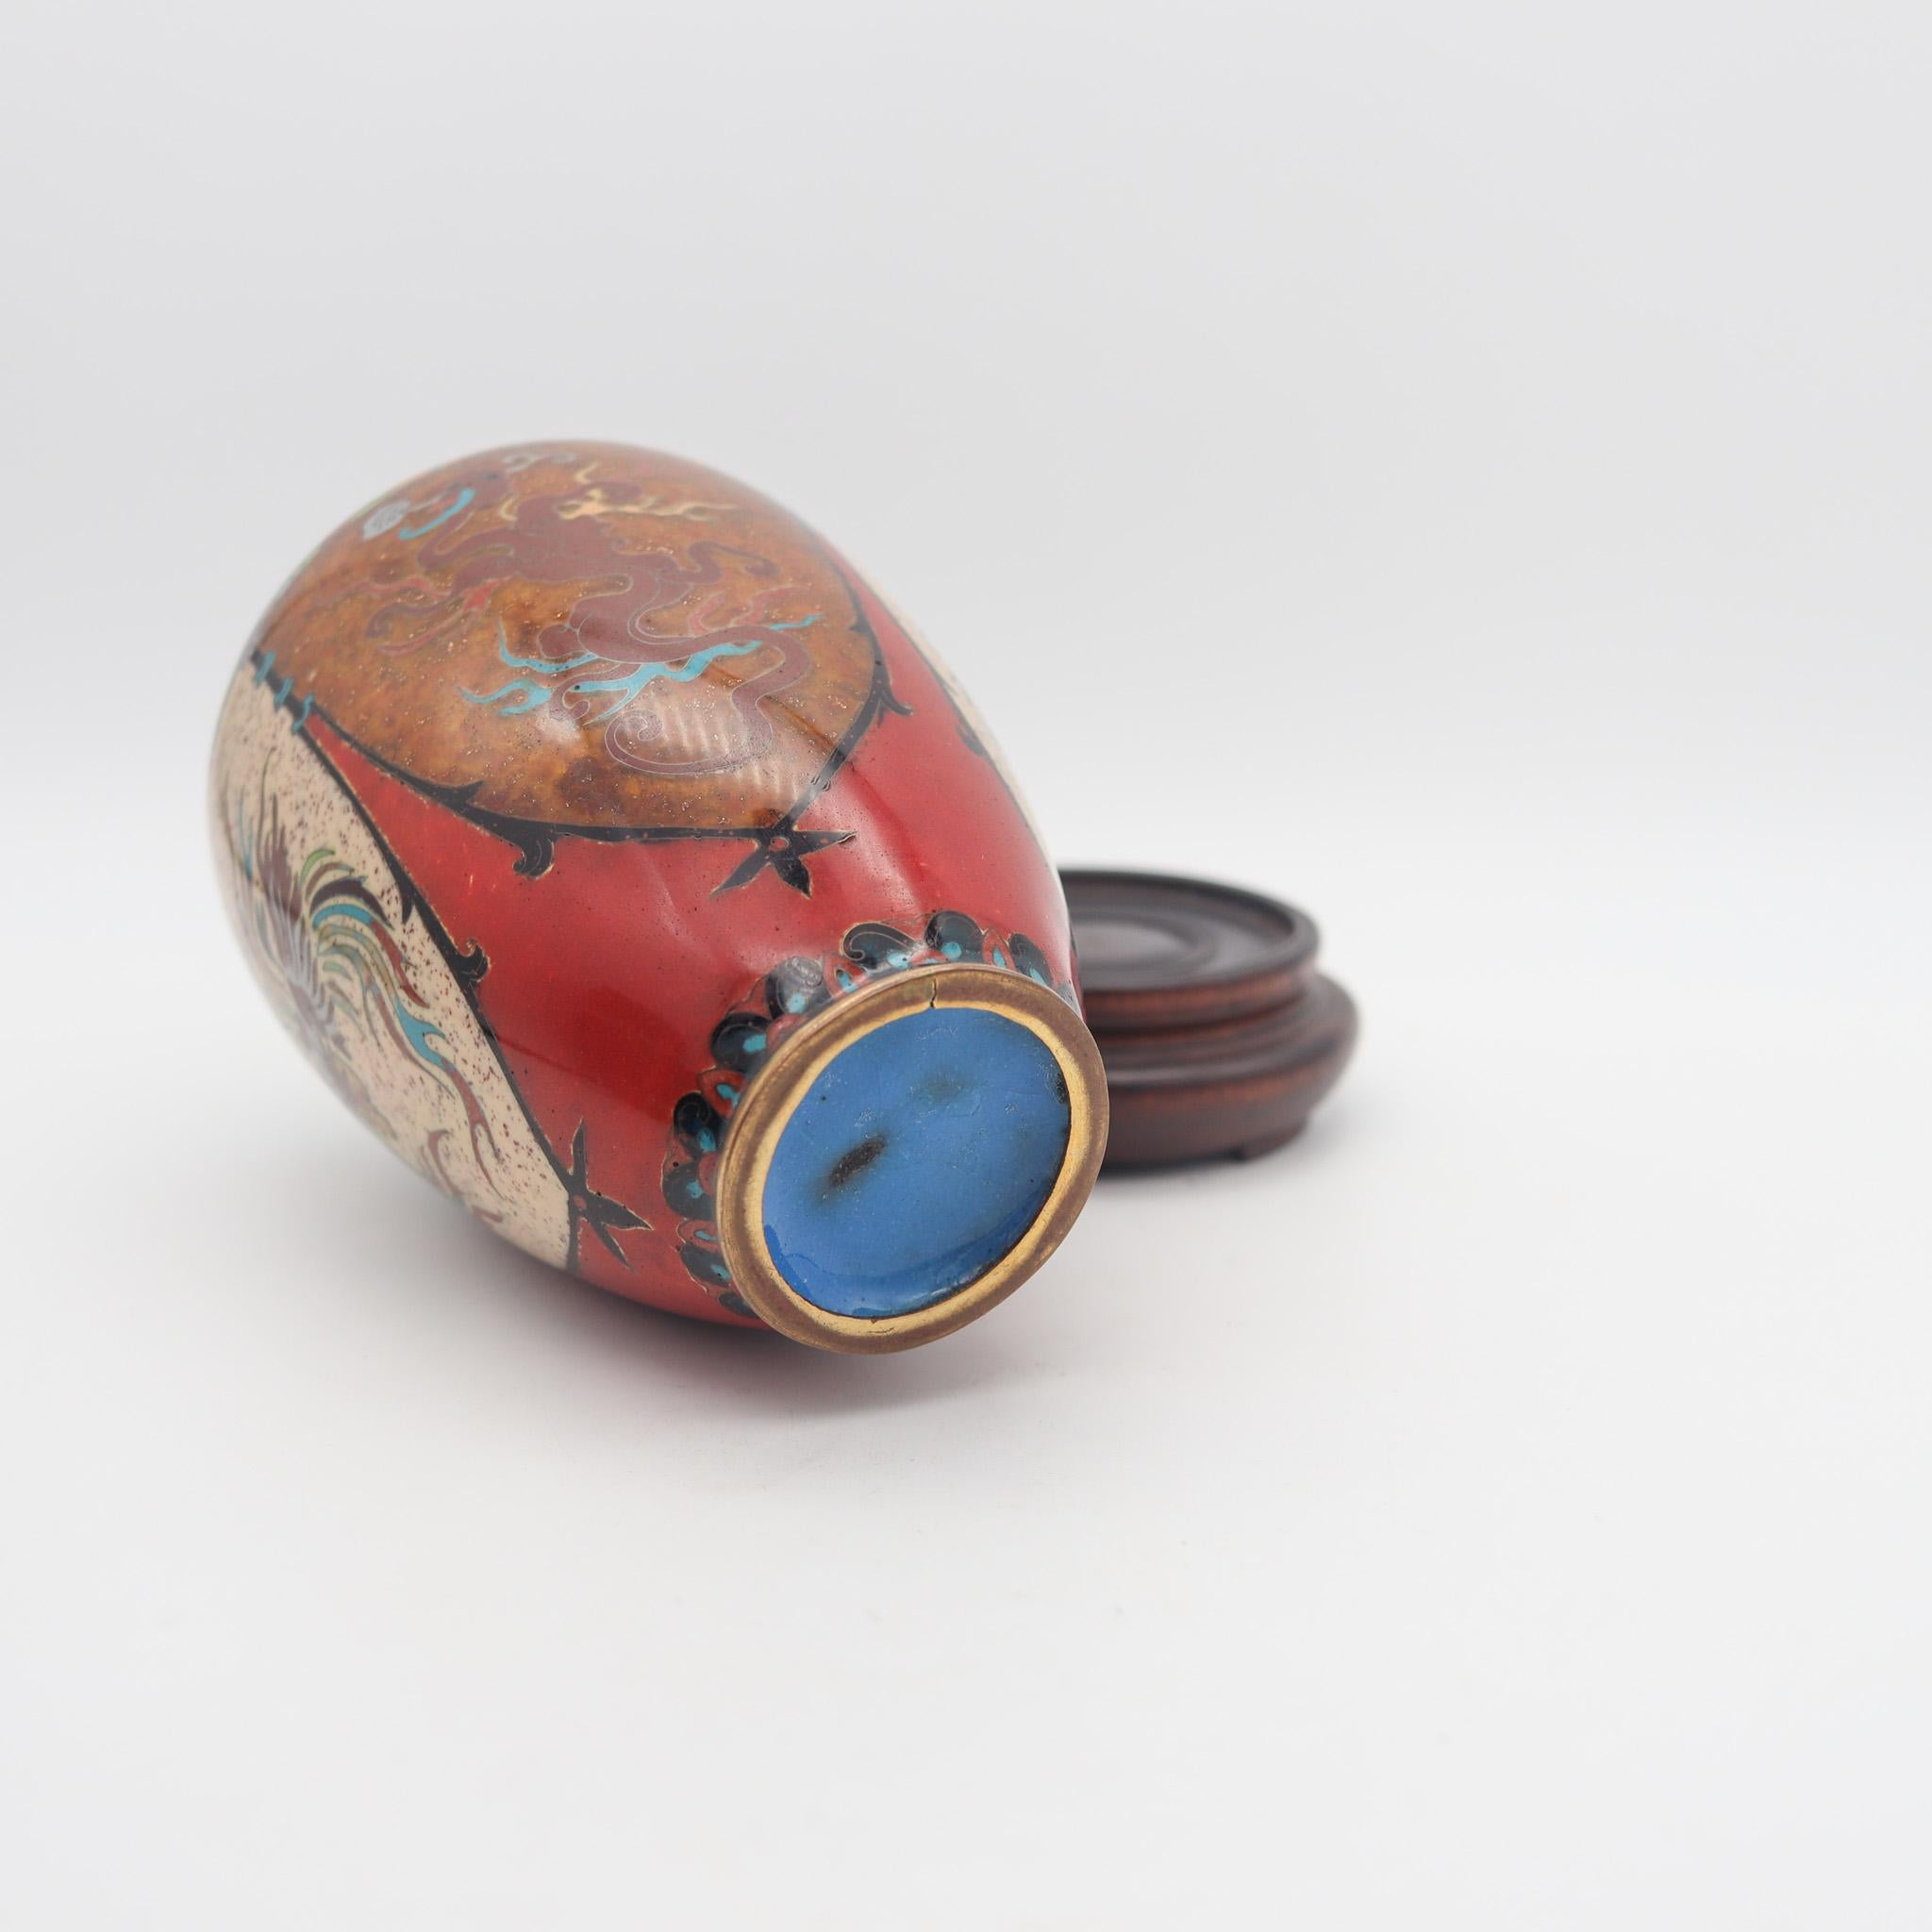 Japan 1890 Meiji Period Decorative Vase In Cloisonné Enamel With Wood Base In Excellent Condition For Sale In Miami, FL